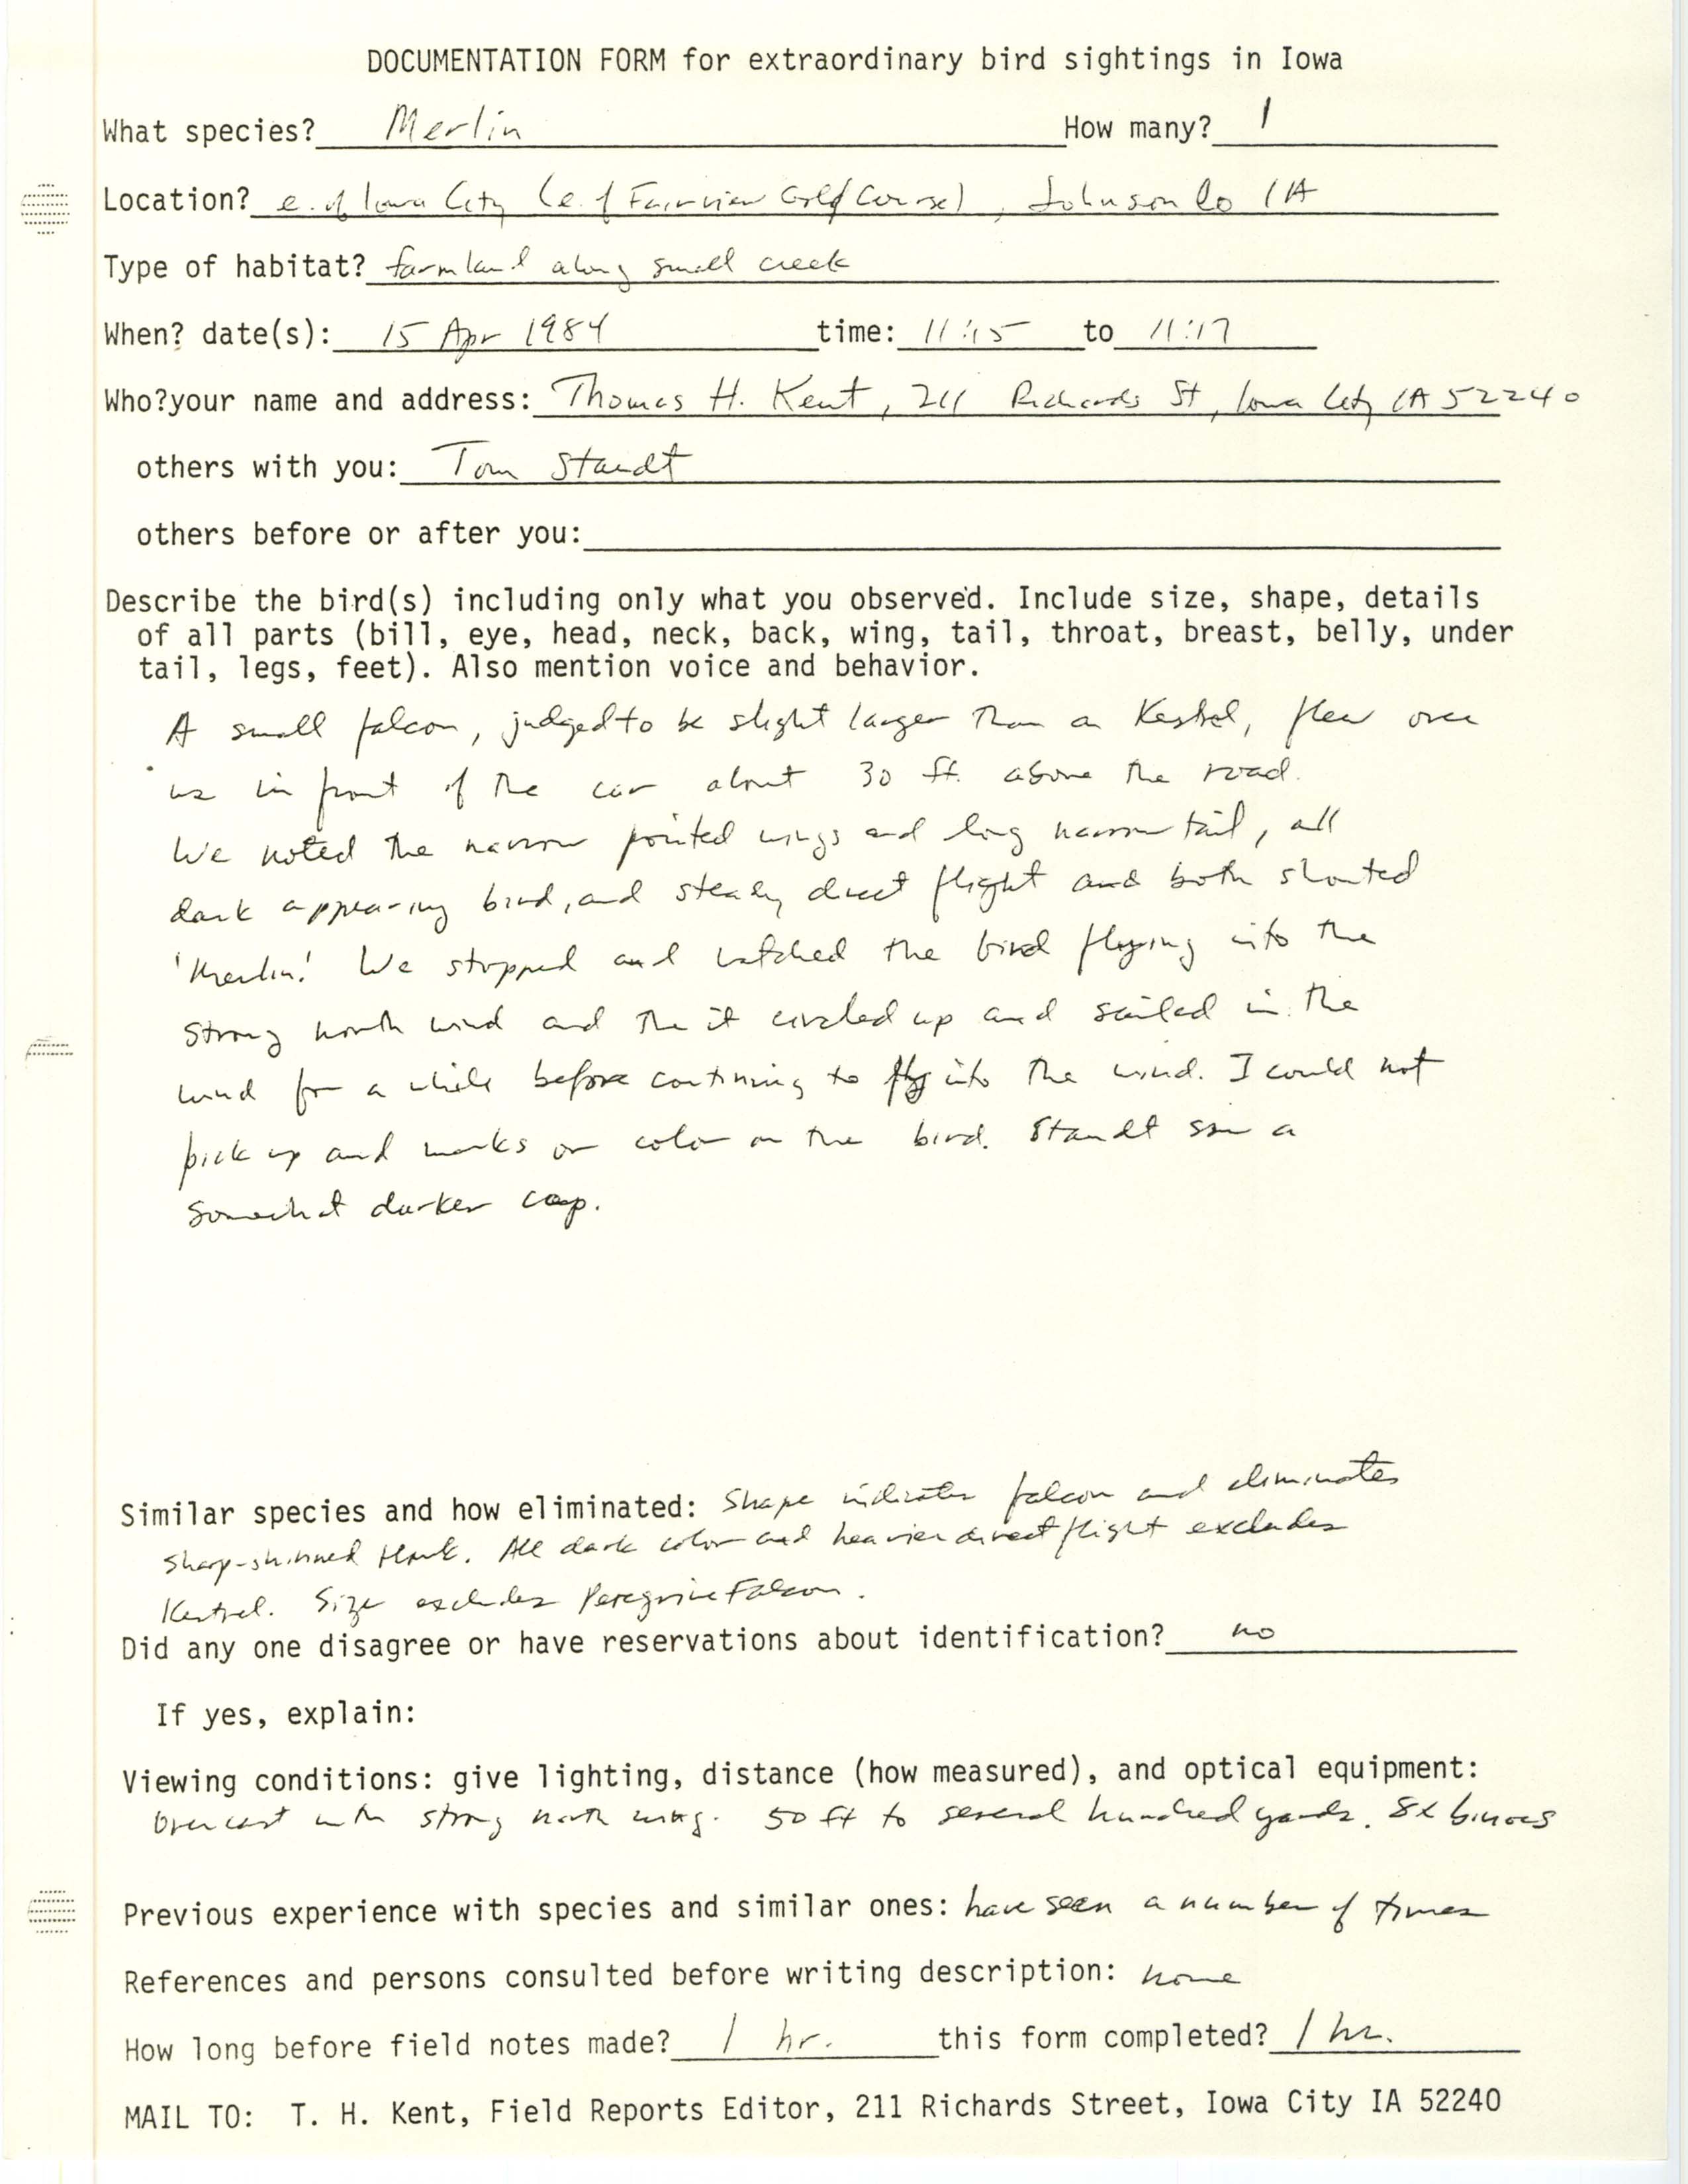 Rare bird documentation form for Merlin east of Fairview Golf Course in Iowa City, 1984